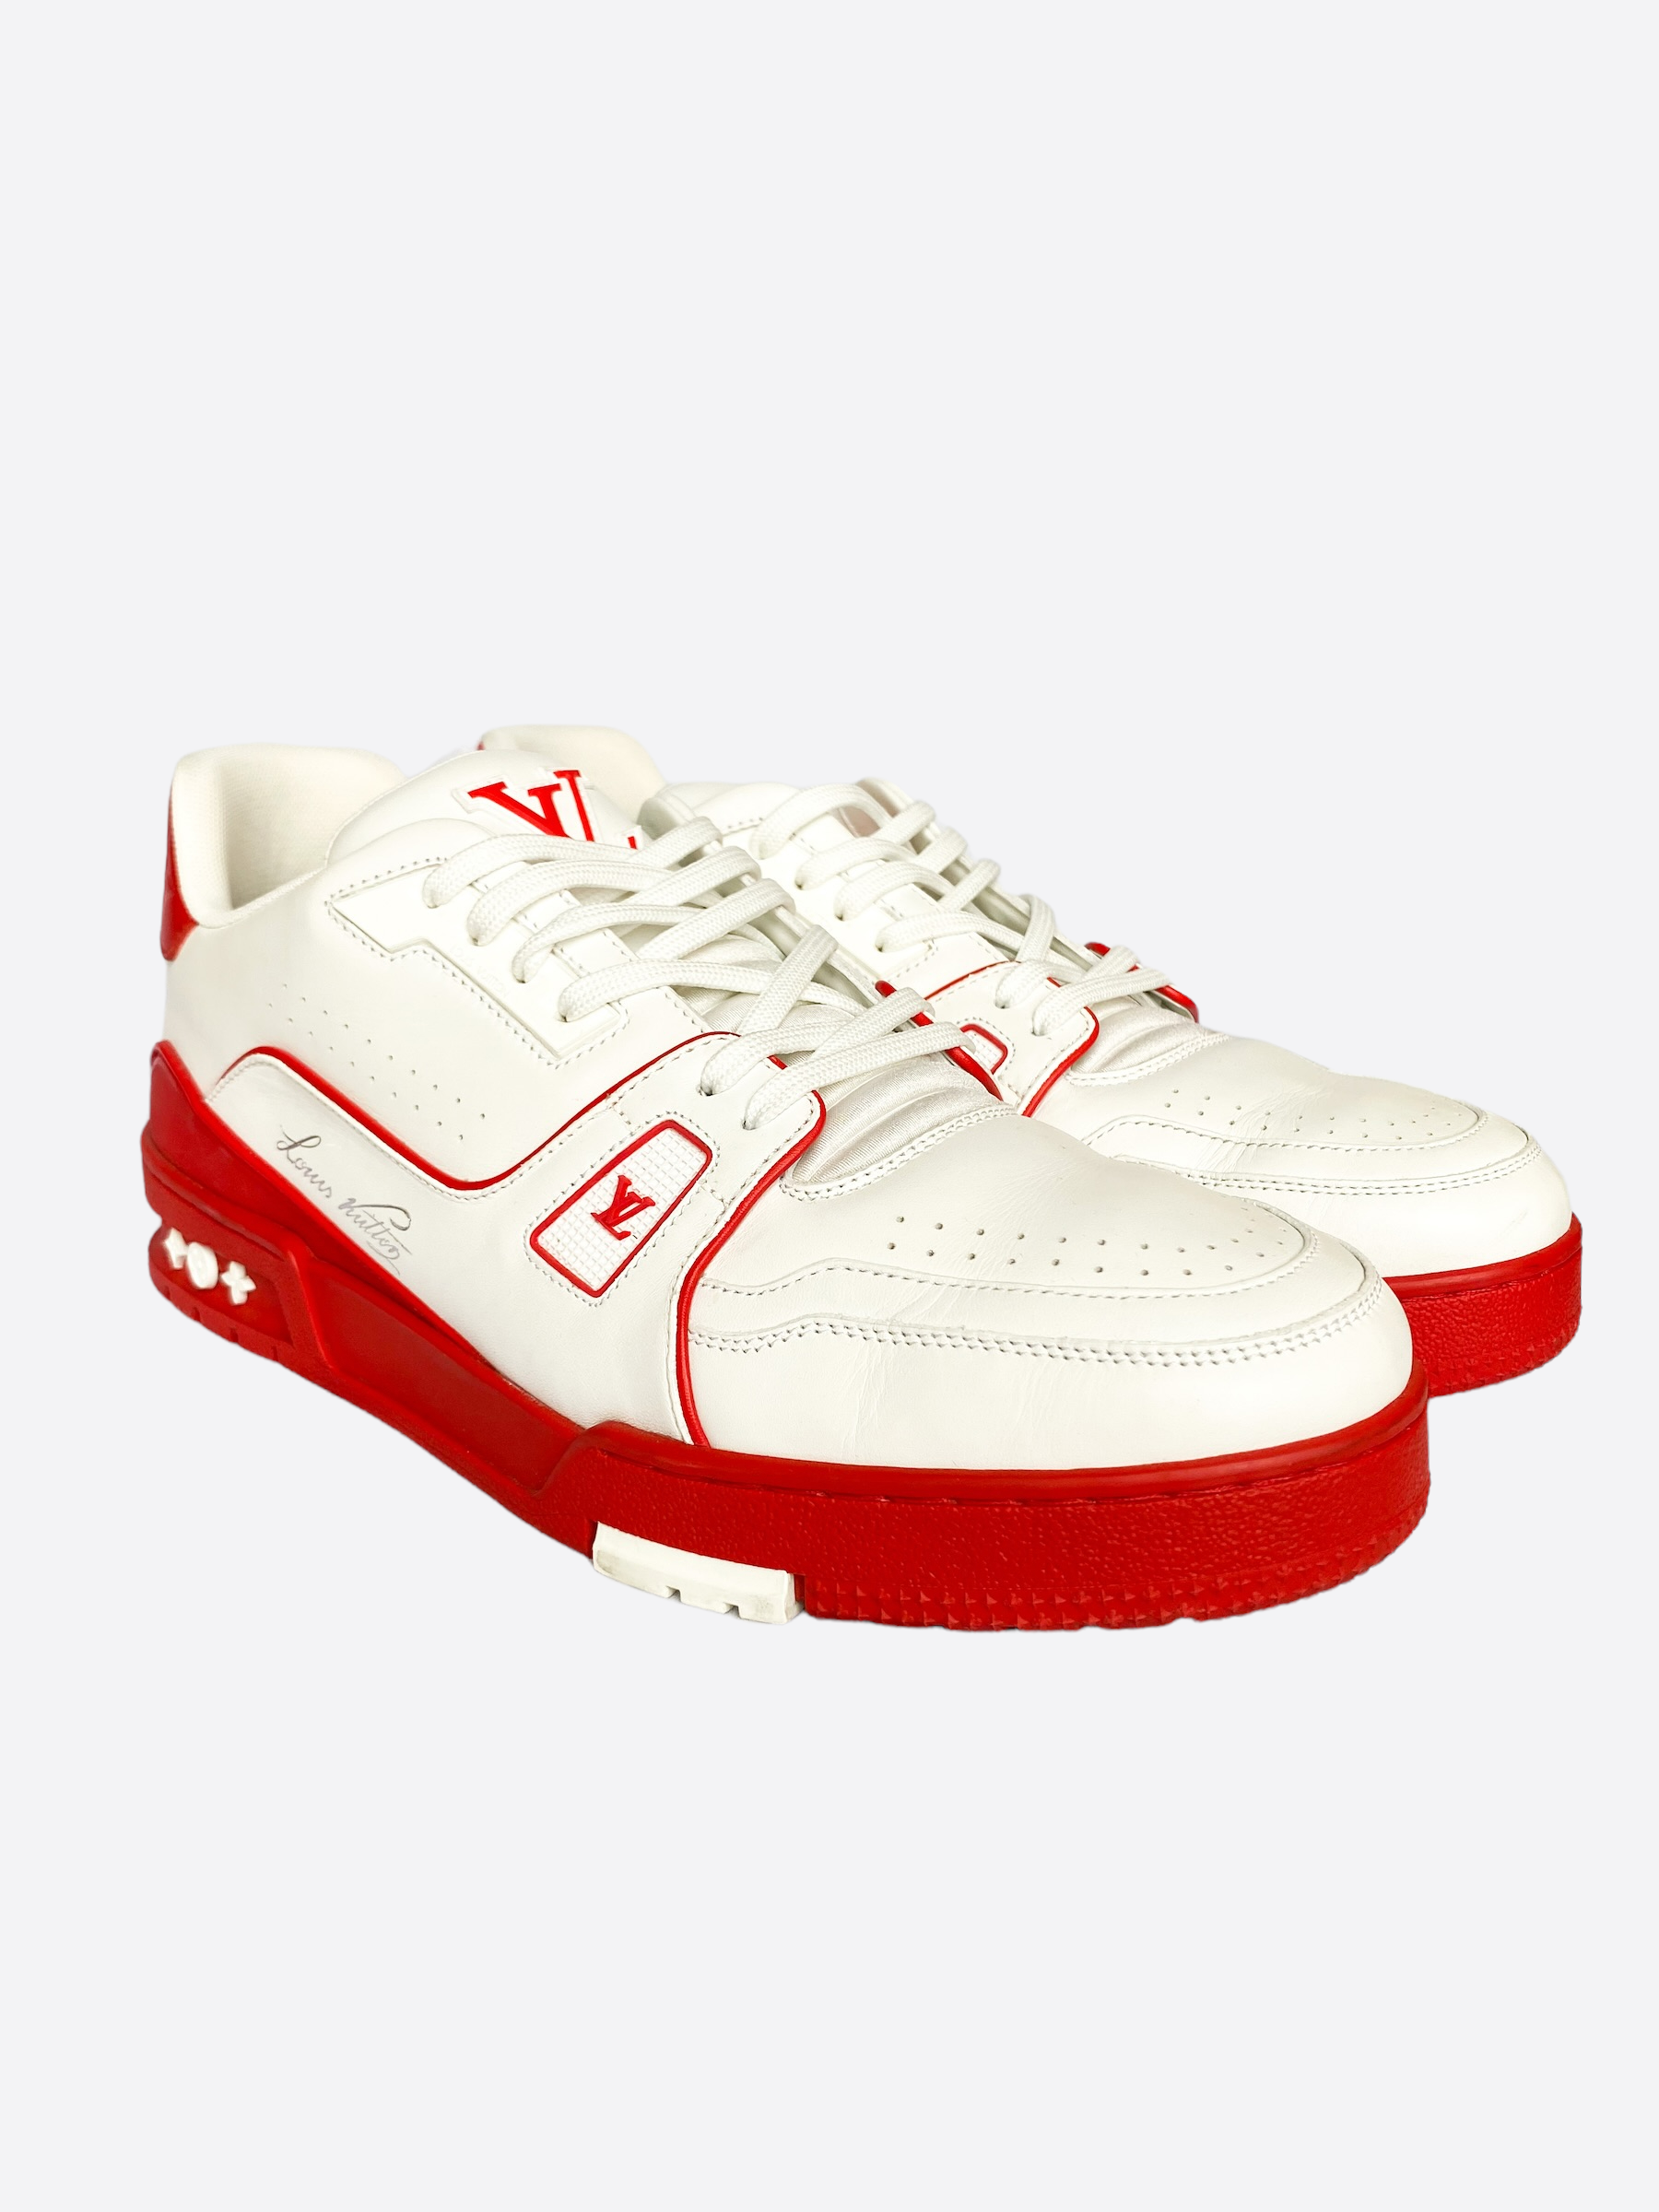 louis vuitton trainer sneaker red